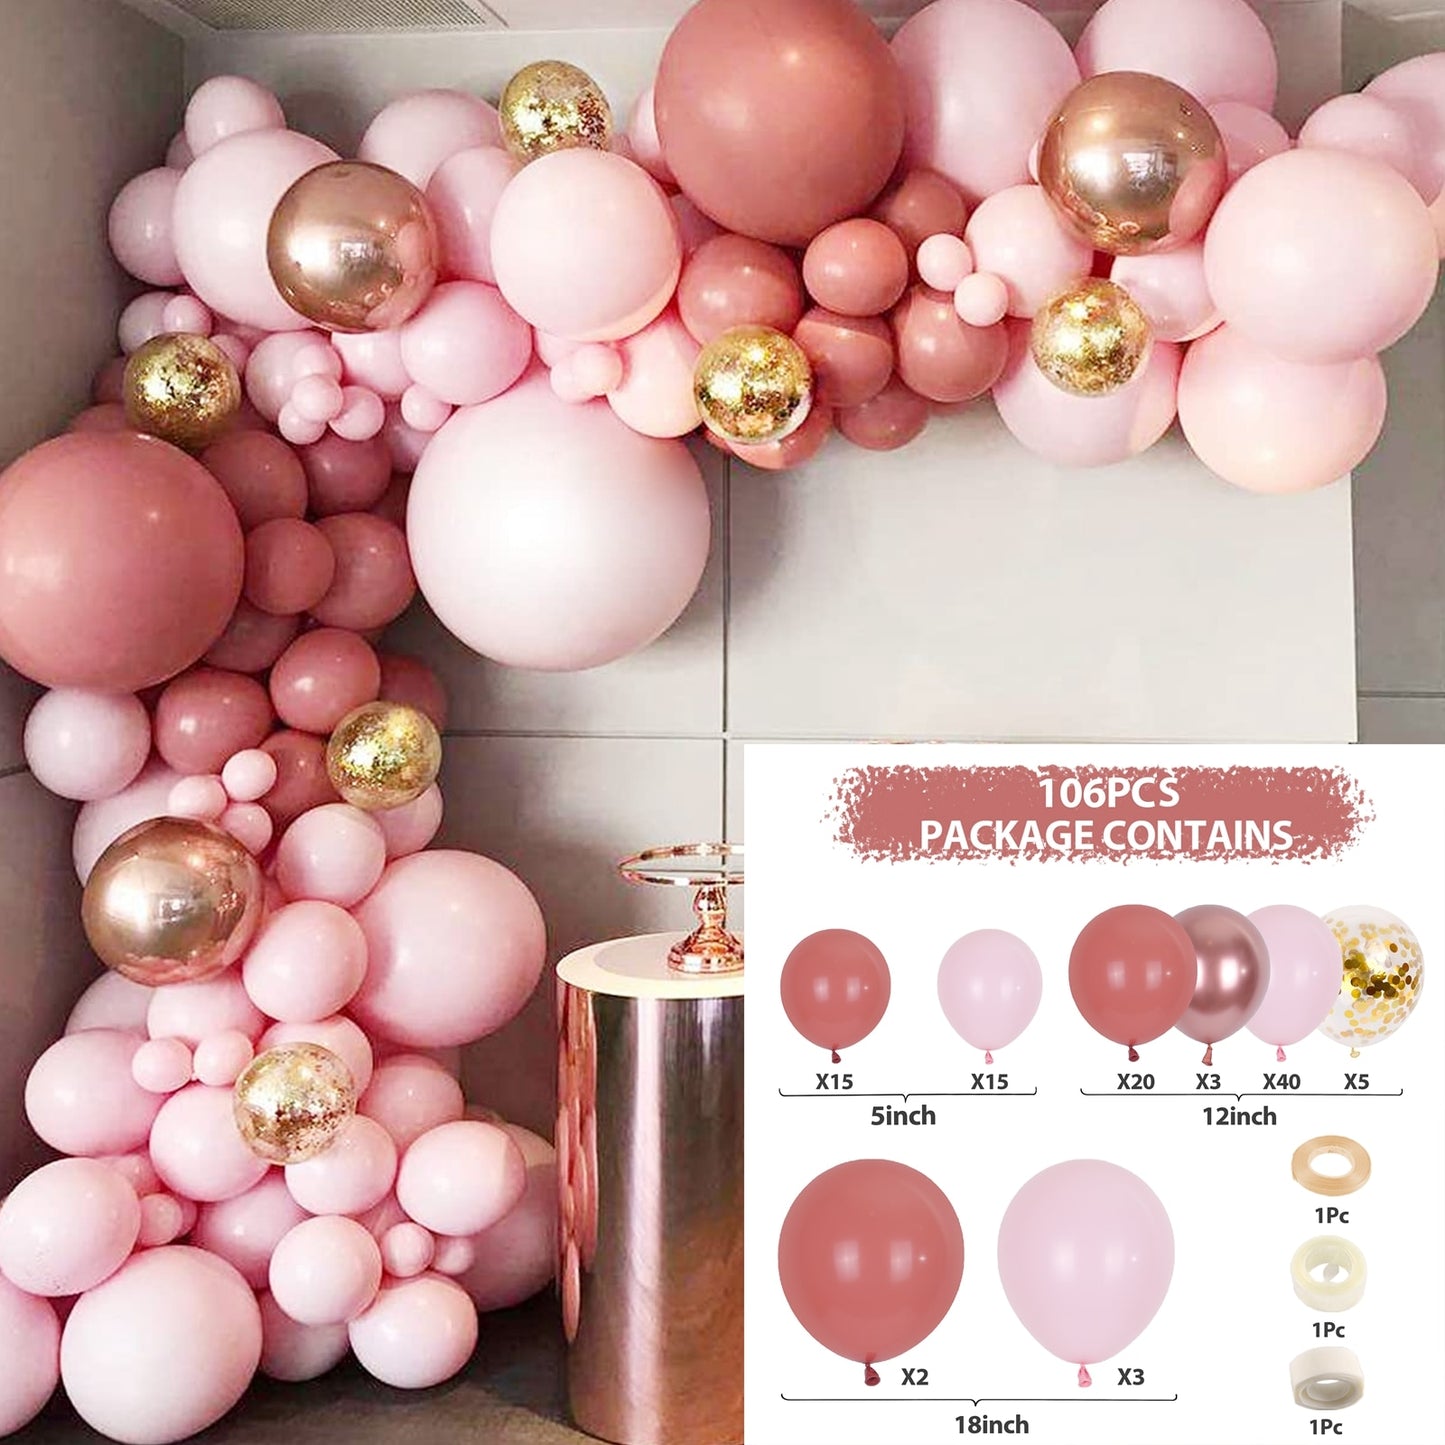 Pink Balloon Garland Arch Kit Birthday Party Decorations Kids Birthday Foil White Gold Balloon Wedding Decor Baby Shower Globos Balloons Set for Birthday Parties DailyAlertDeals 32 AS SHOWN 